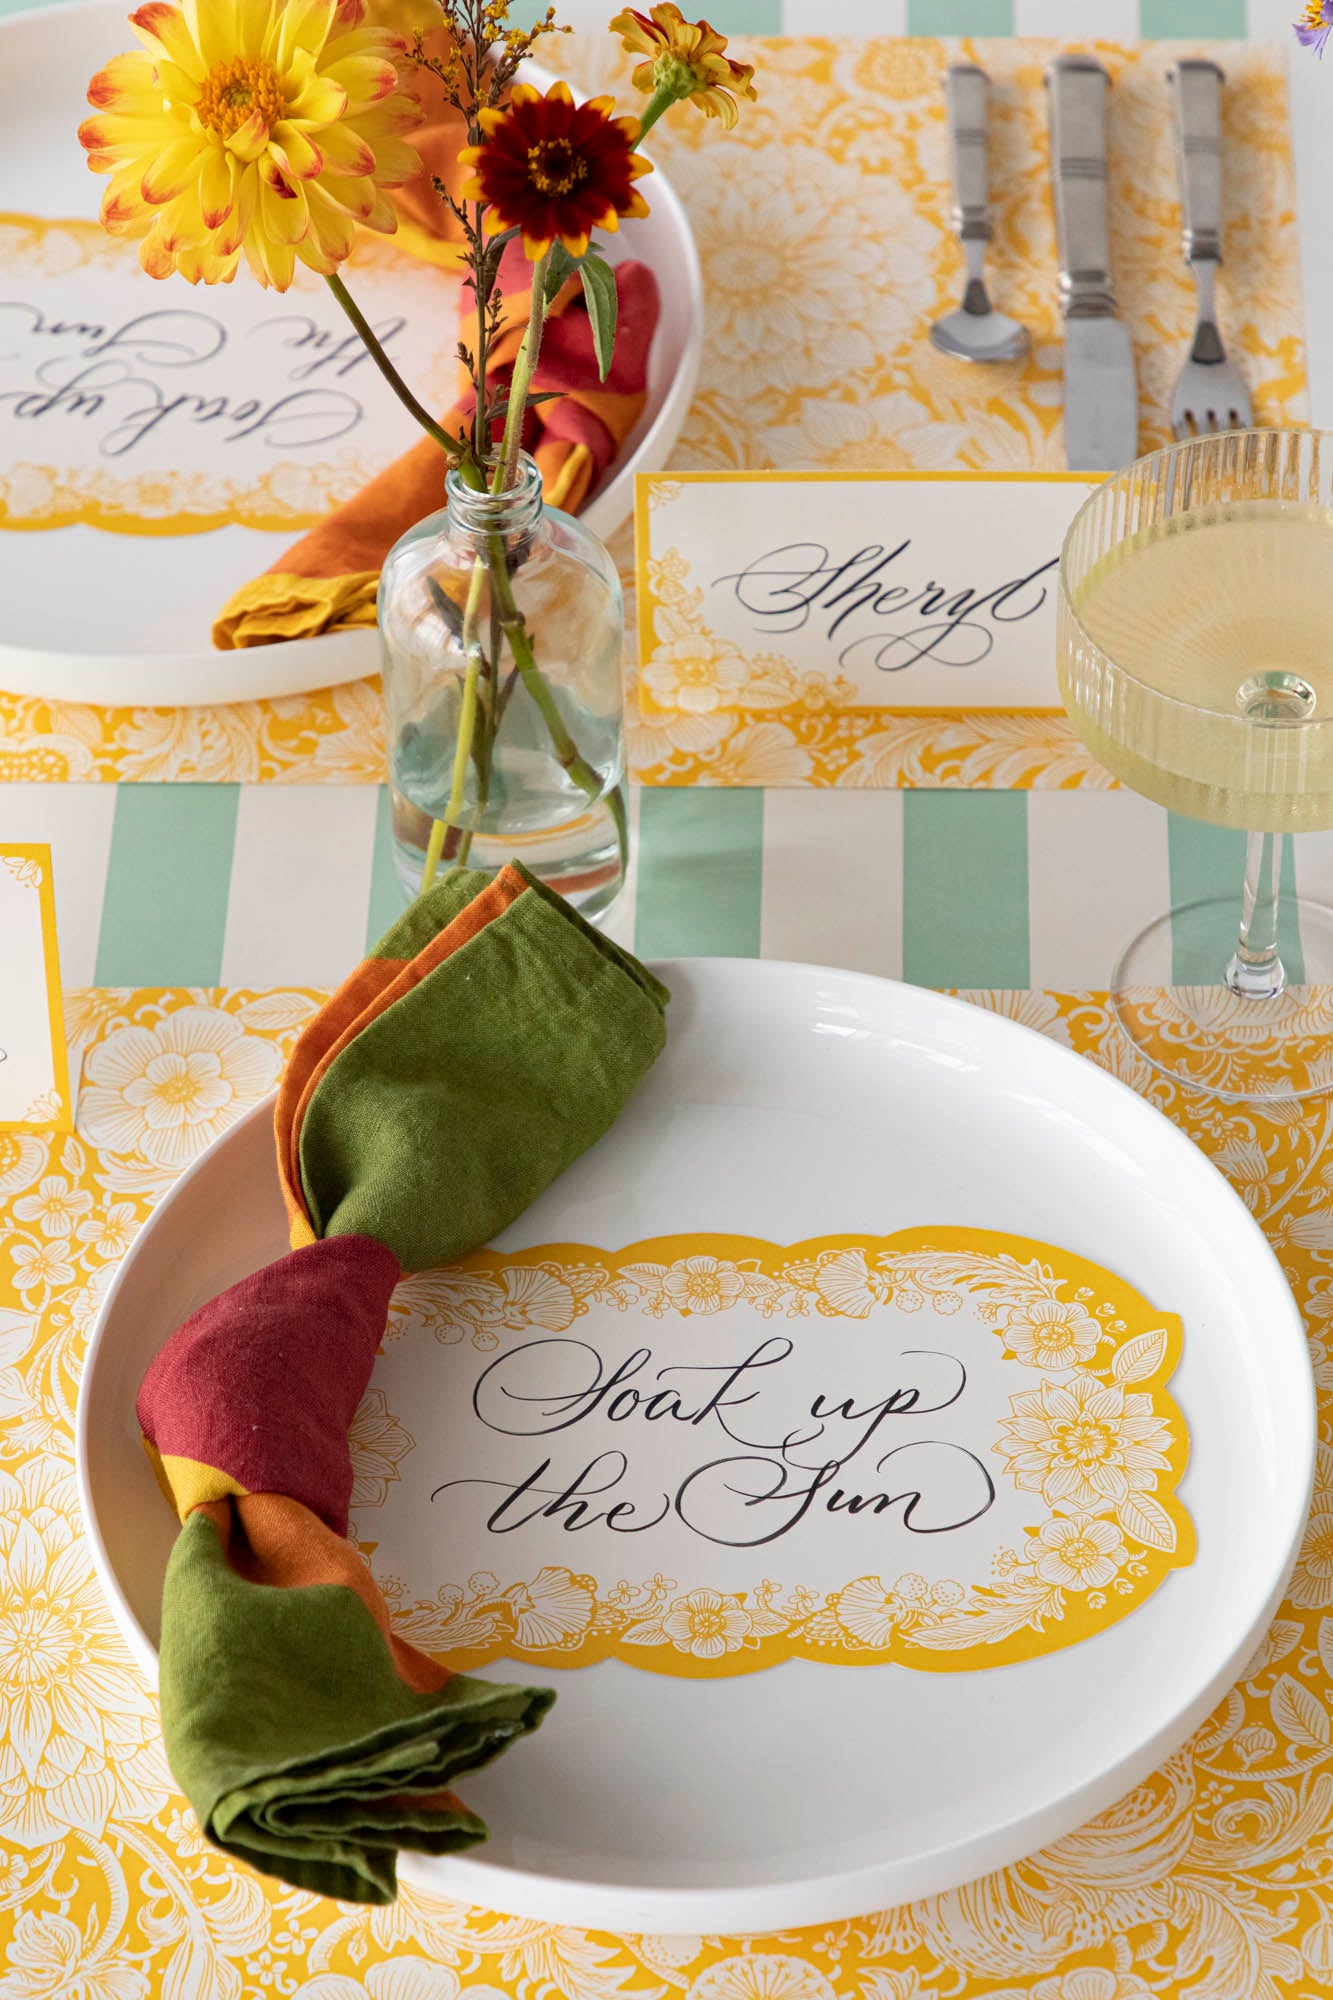 The Spring Bouquet Placemat under an elegant springtime table setting.